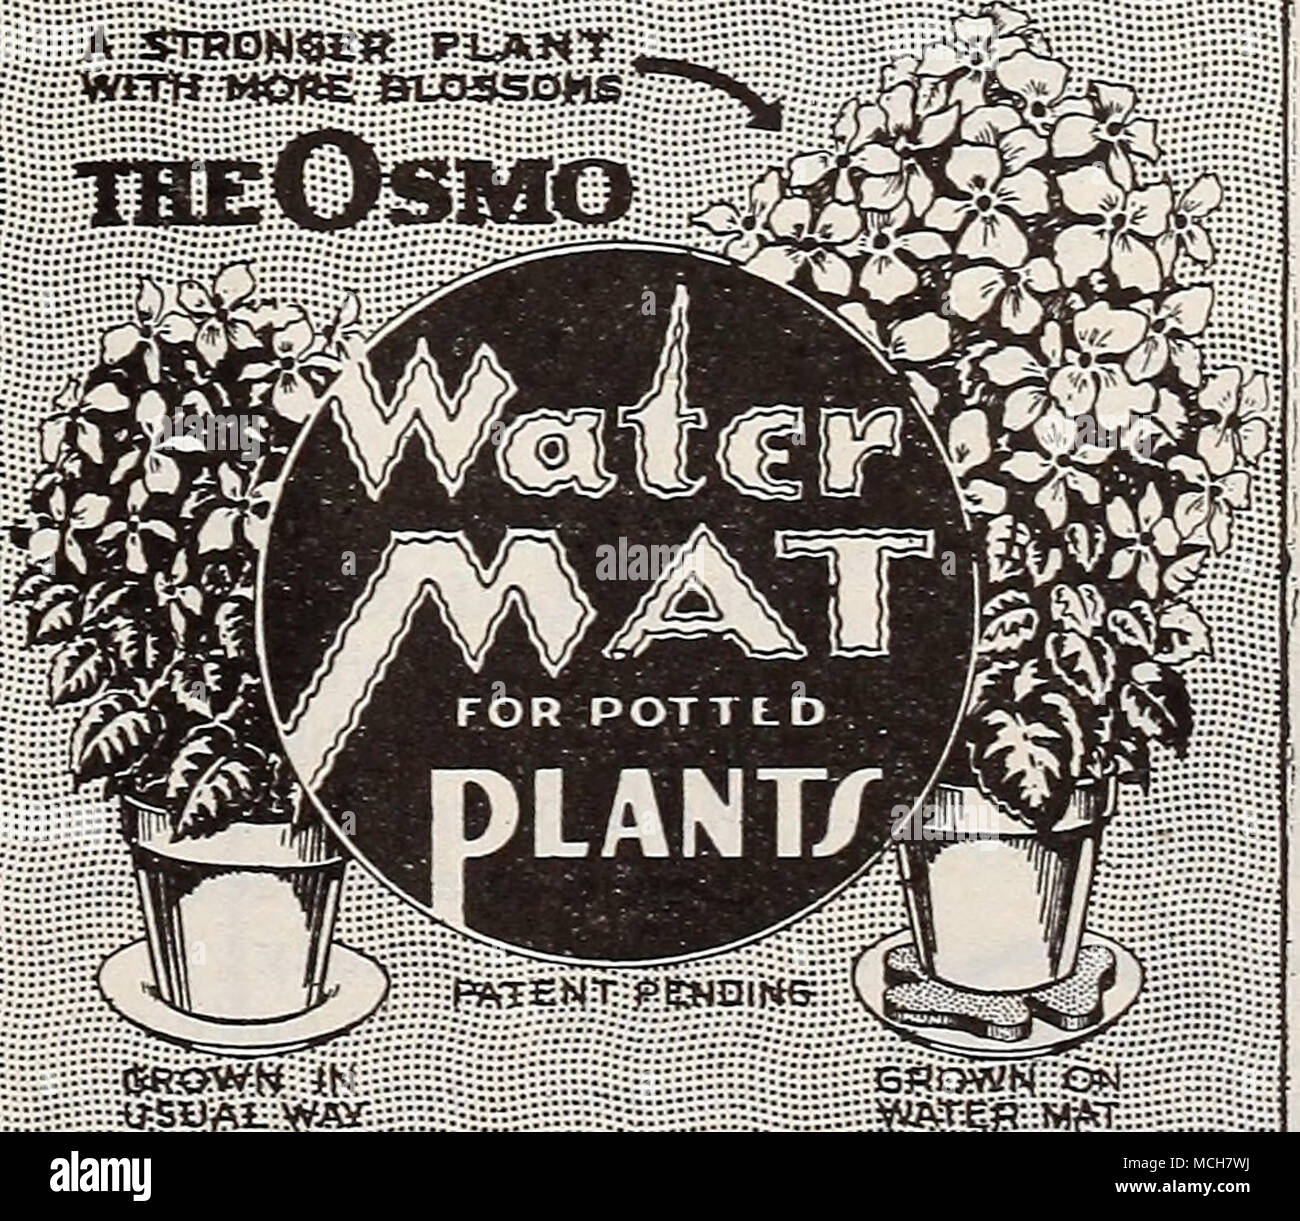 . medium size, for 4 to 5| inch pots 30c; up to 3| inch 25c, postpaid. Watermat. The Watermat makes it possible to have plants in the home that are as perfect as those grown in the greenhouse. Place the mat in the saucer below the plant and keep moist at all times. This is in addition to the regular watering. Gives remarkable results with many kinds of plants. Large size, for 6 to 8 inch pots 35c; small size for pots 74 Stock Photo